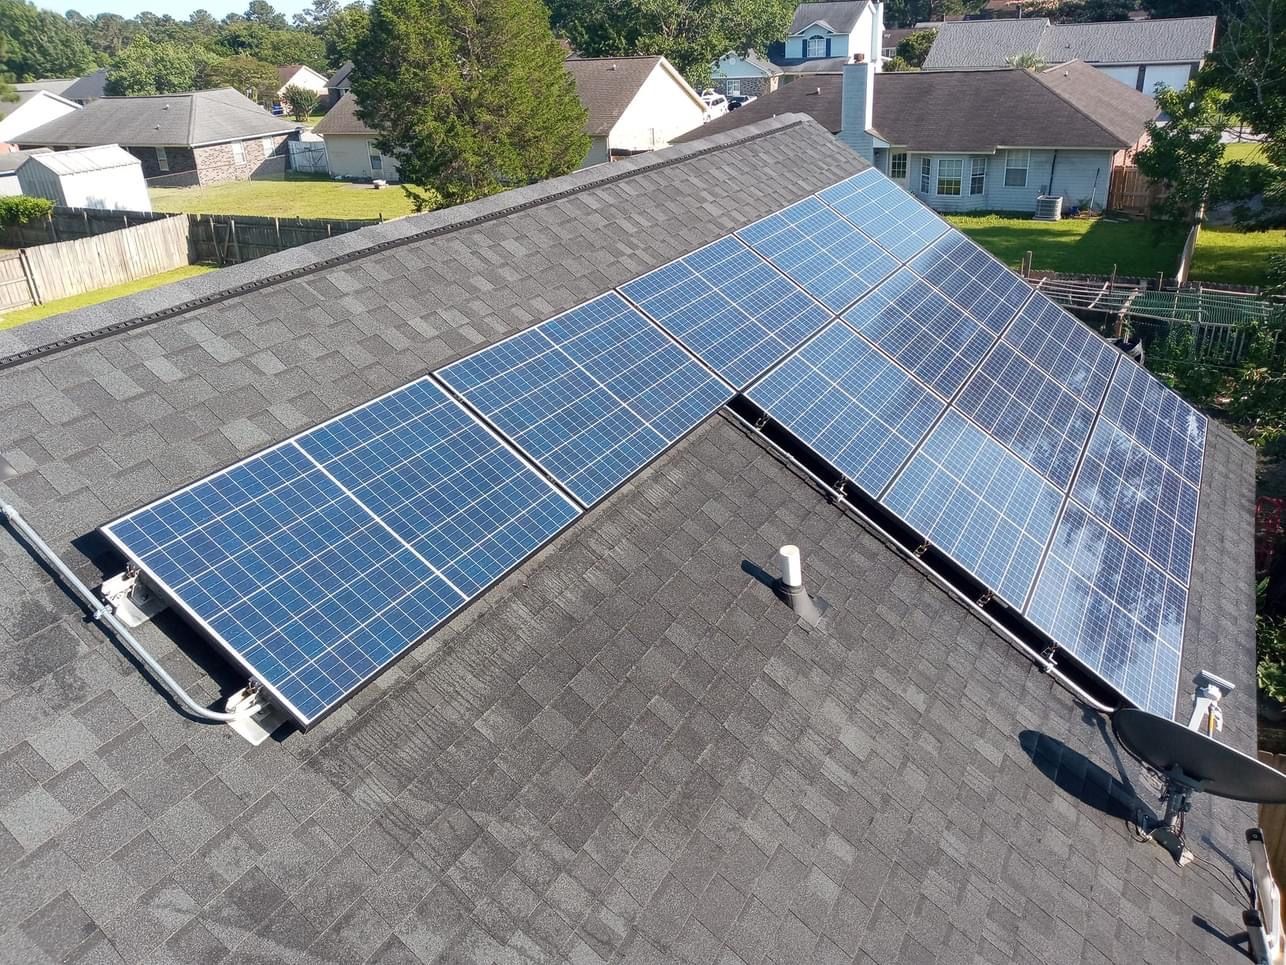 Solar panels in Orange, Orange County, shimmer vibrantly after our expert cleaning treatment